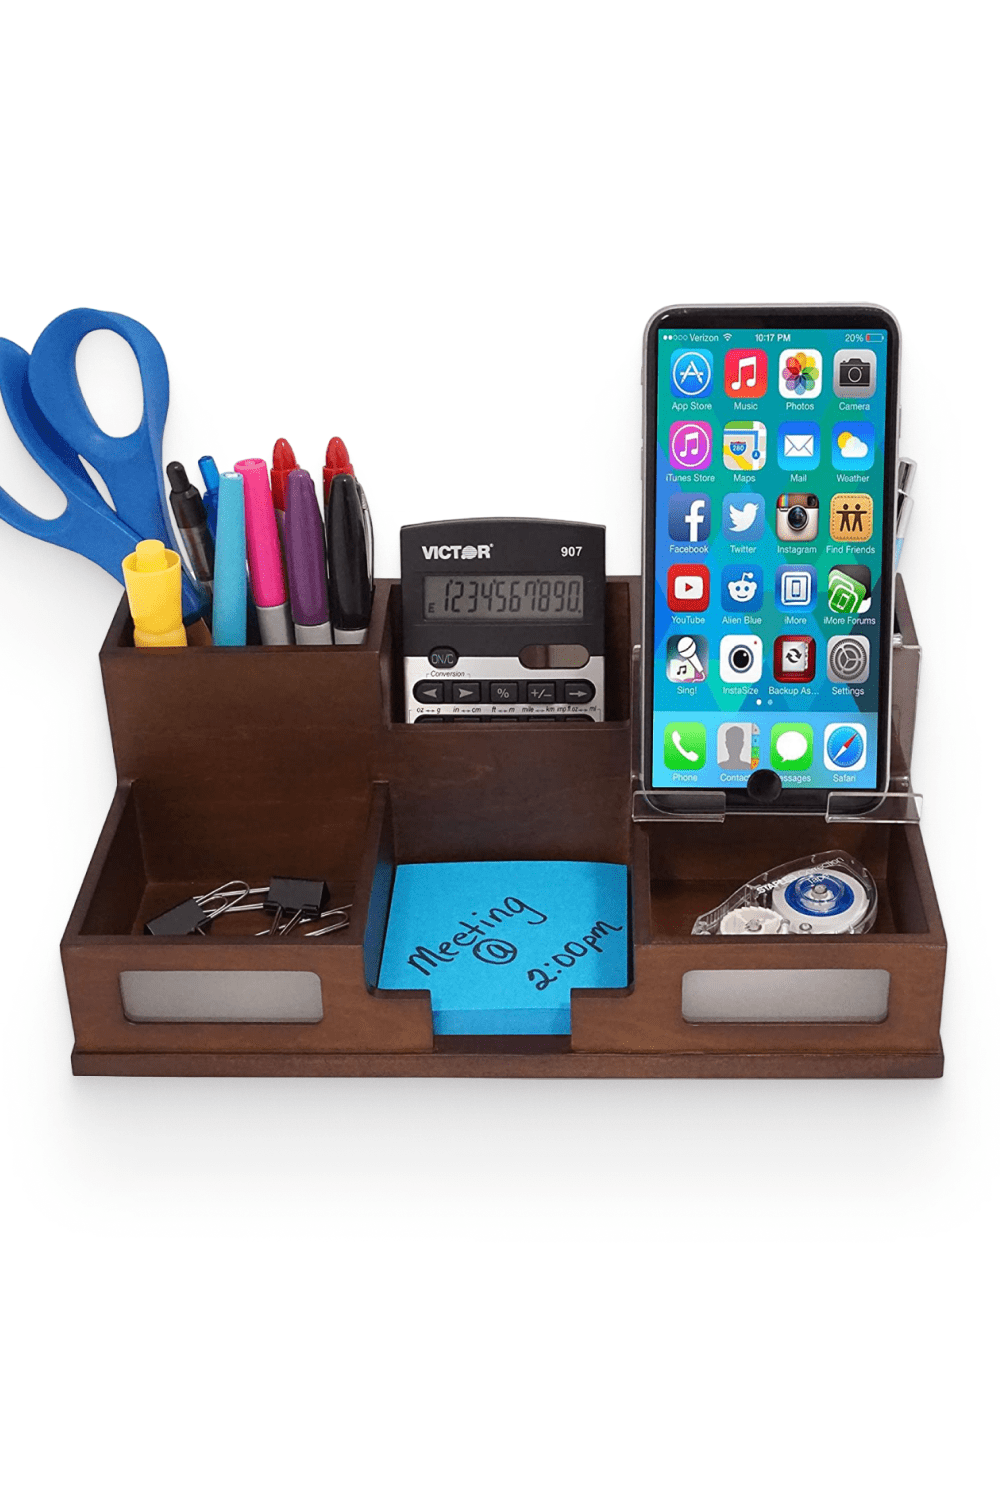 Victor All-in-One Desk Organizer with Smart Phone Holder.